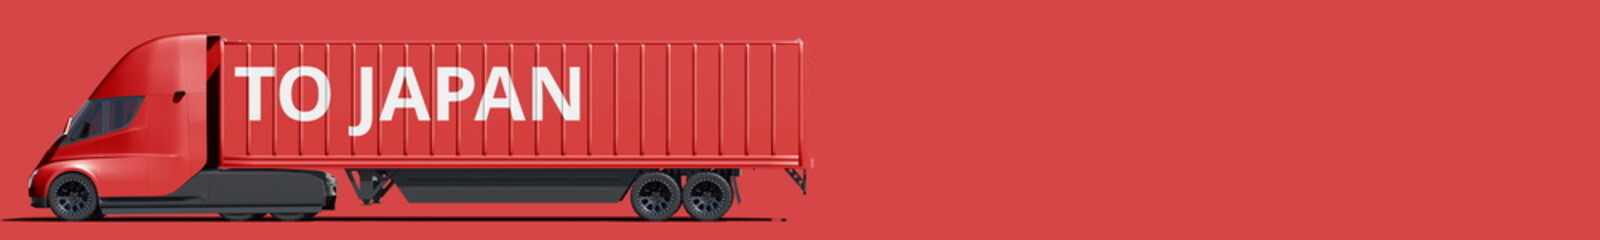 TO JAPAN text on the modern electric red truck, 3d rendering